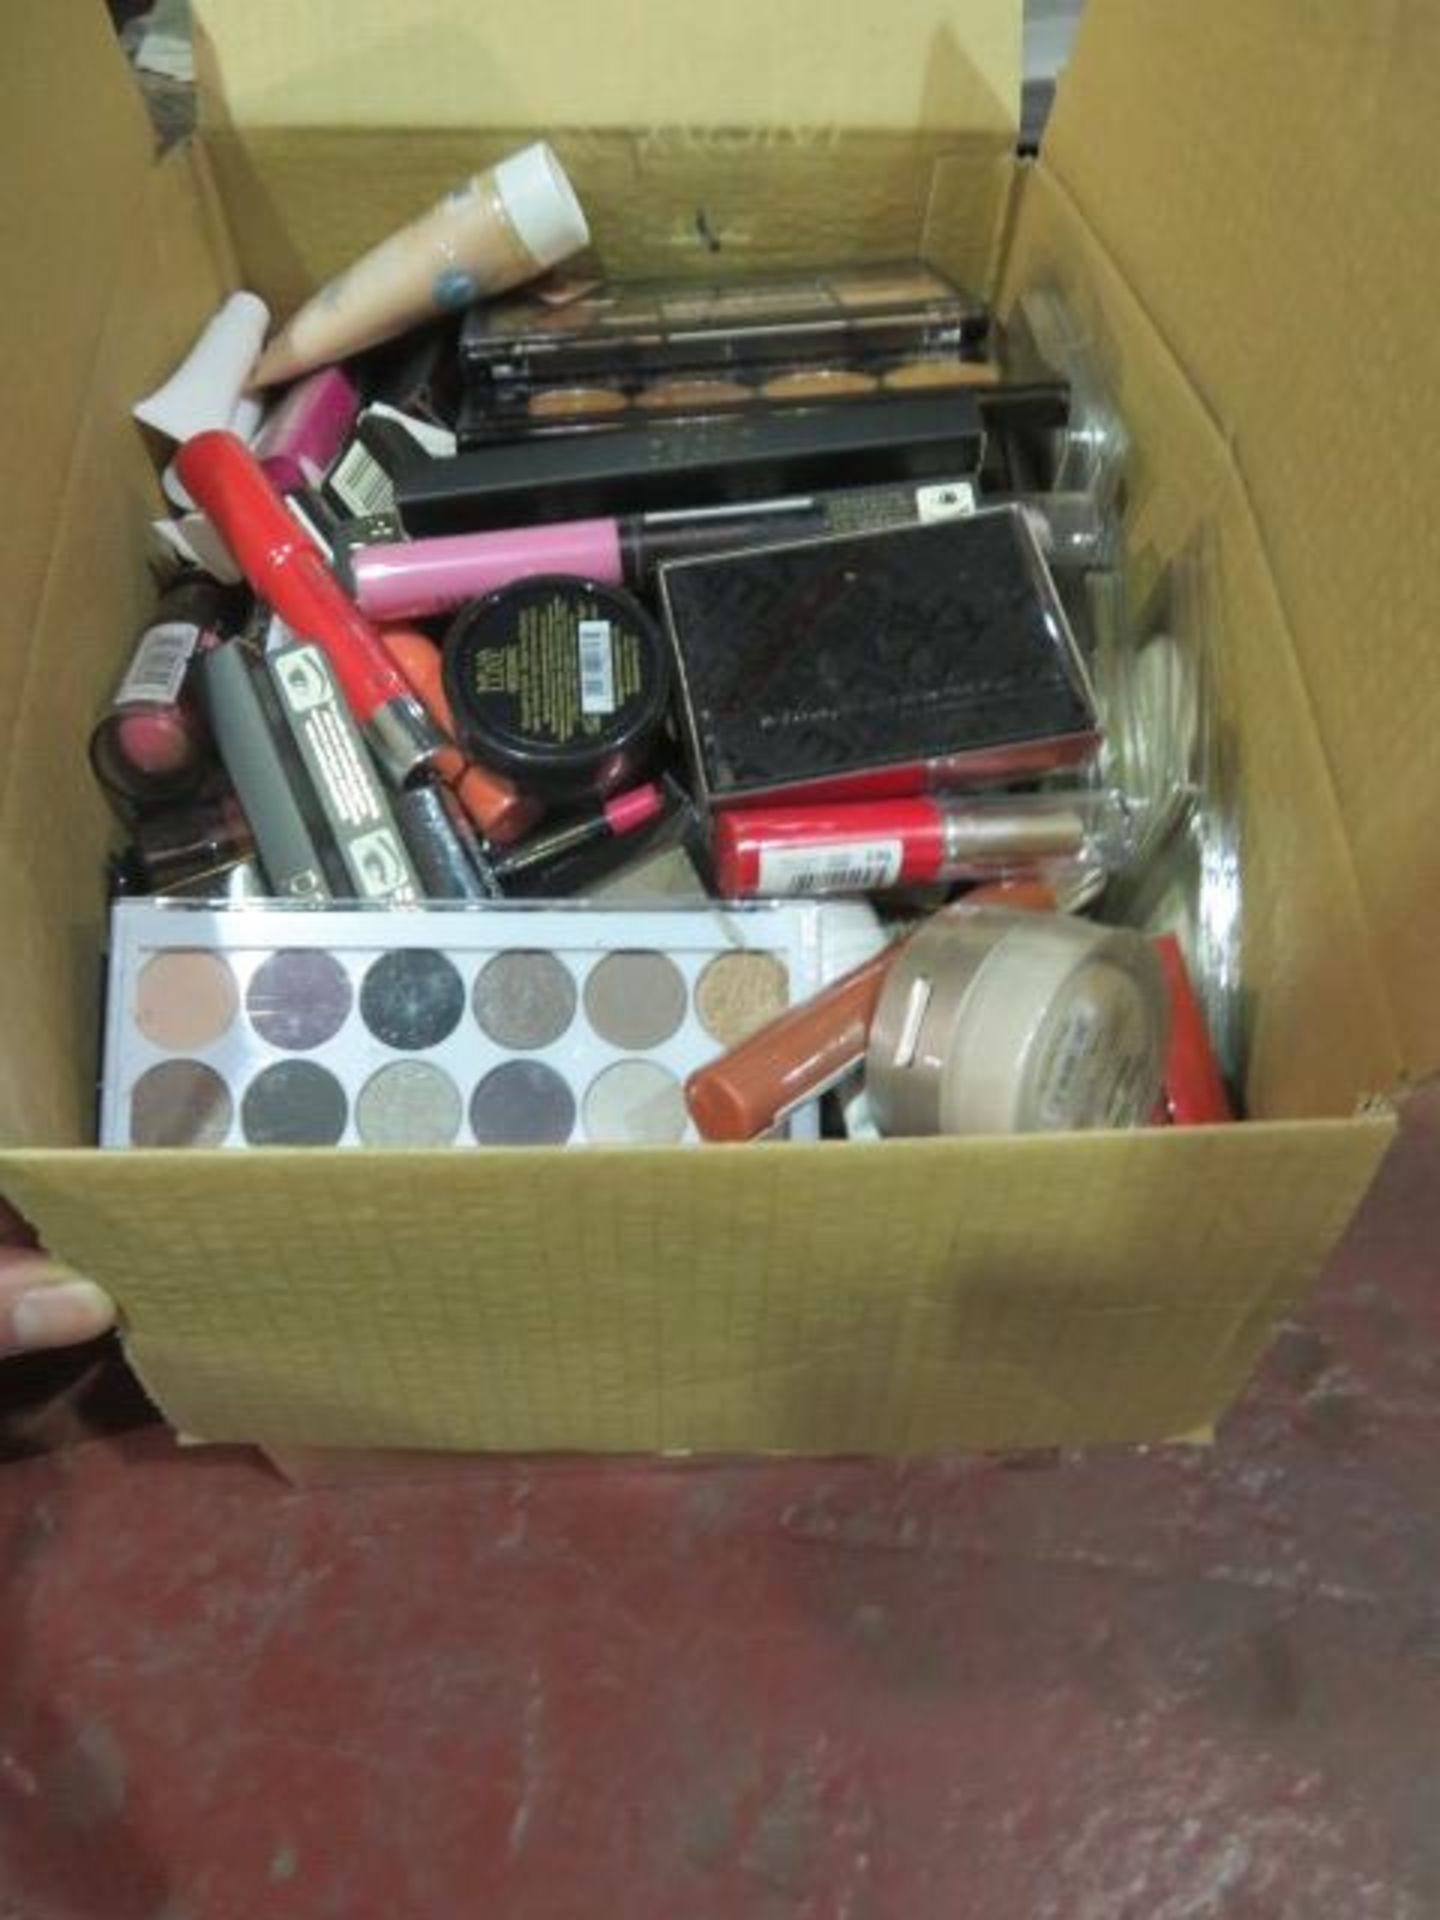 Circa. 200 items of various new make up acadamy make up to include: correct and conceal palette, - Image 2 of 2